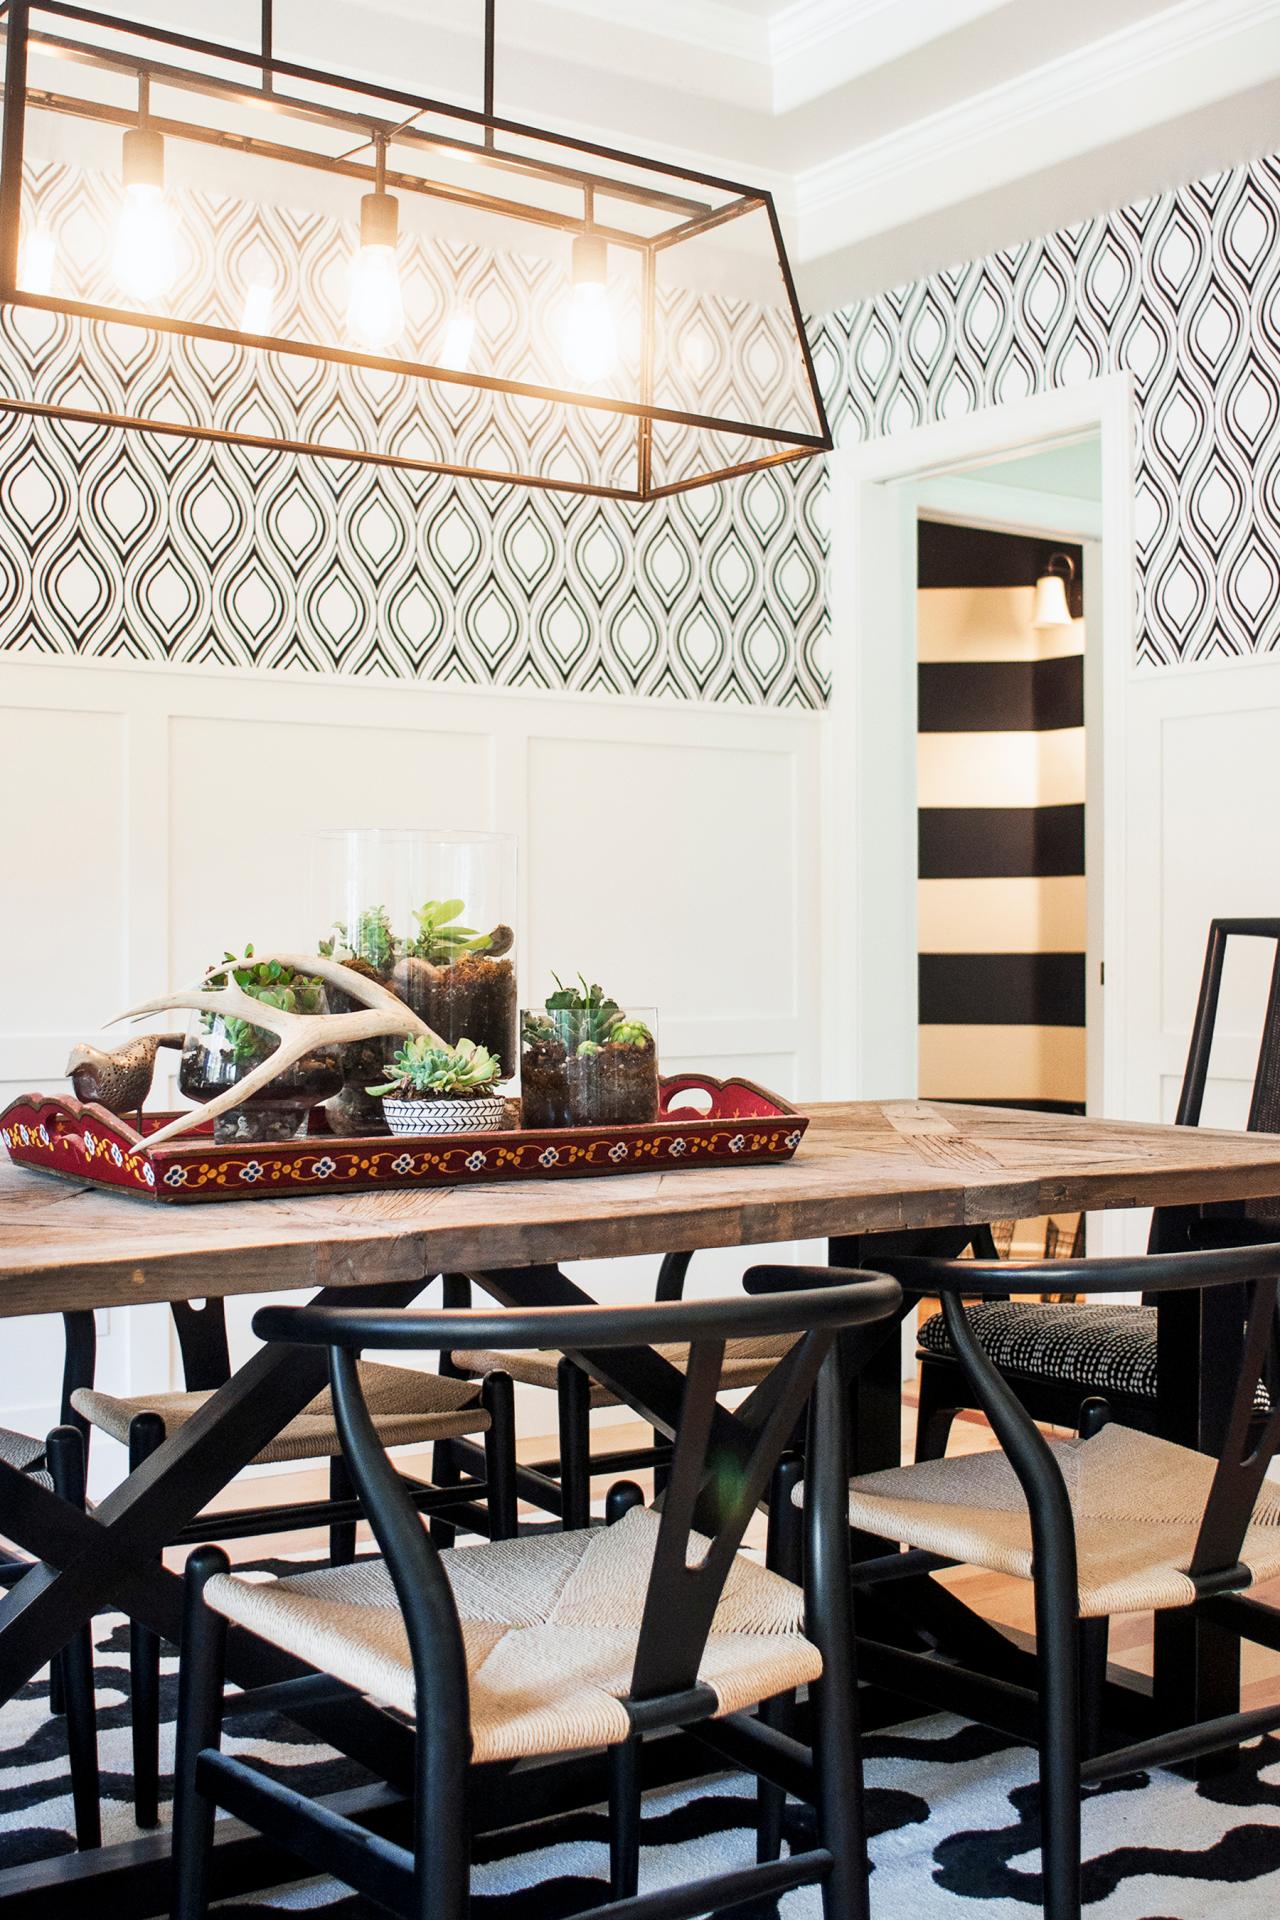 Black and White Dining Room With Patterned Wallpaper | HGTV